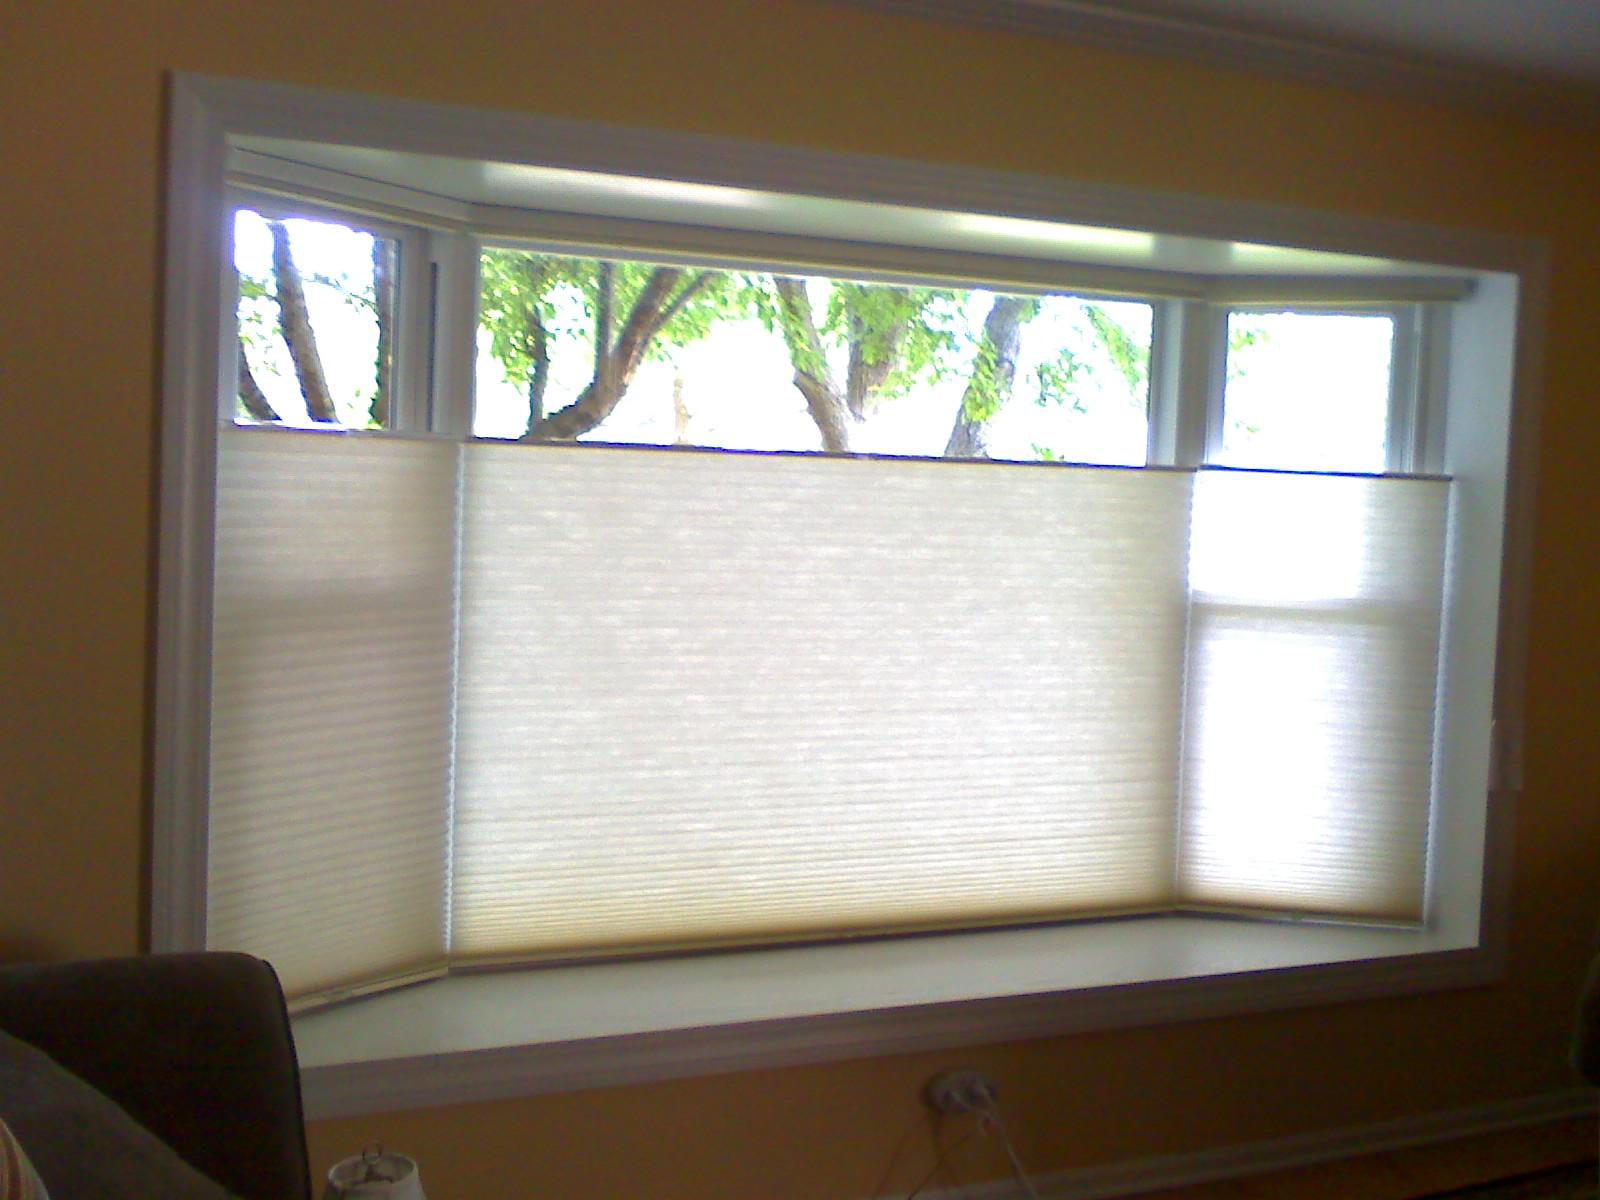 Roman Shades or Cellular Shades for Privacy Factor